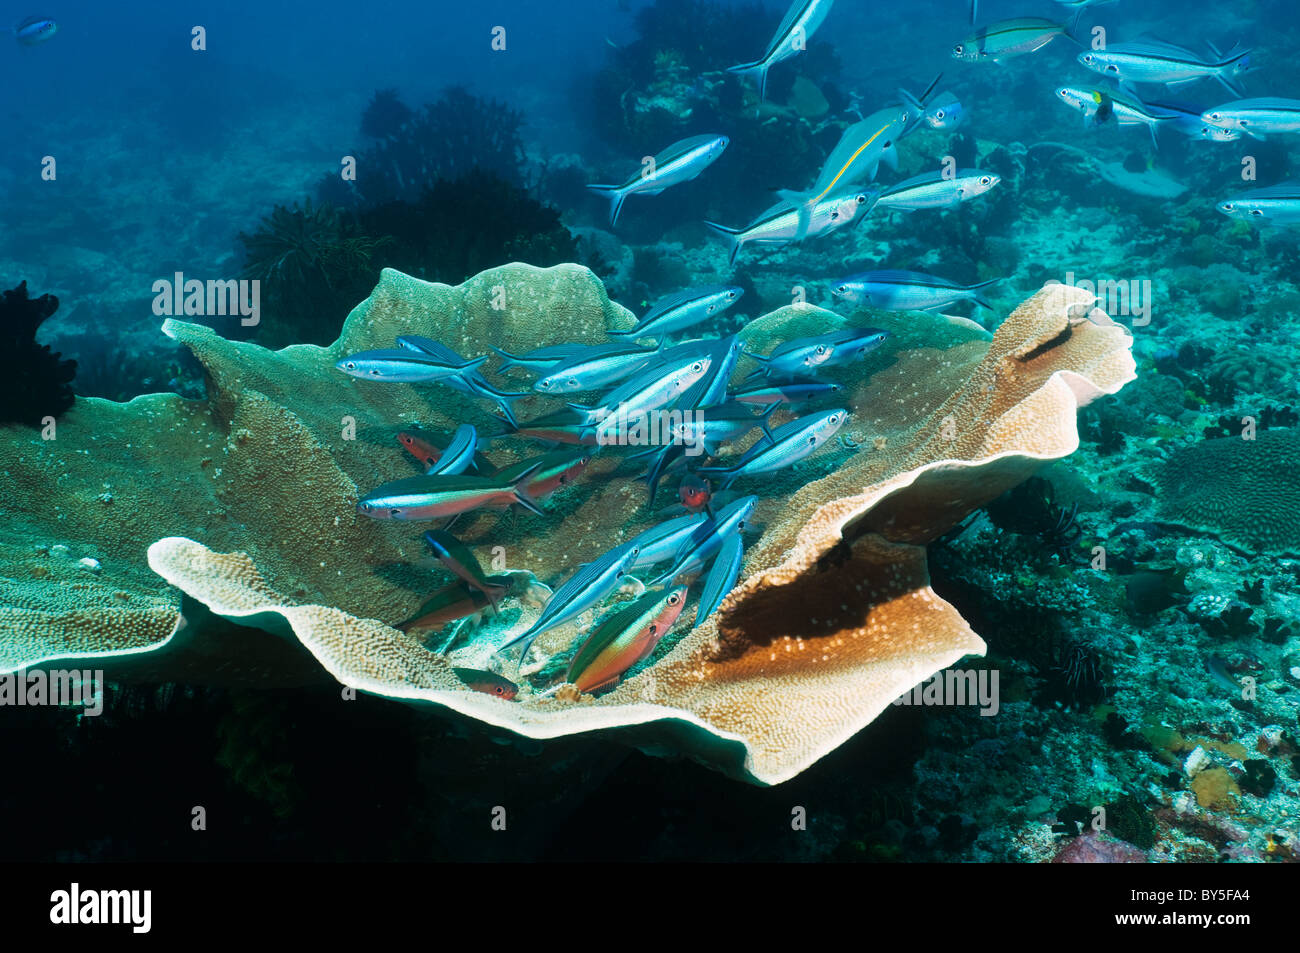 Bluestreak fusiliers (Pterocaesio tile) gathering at a cleaning station over coral. Indonesia. Stock Photo